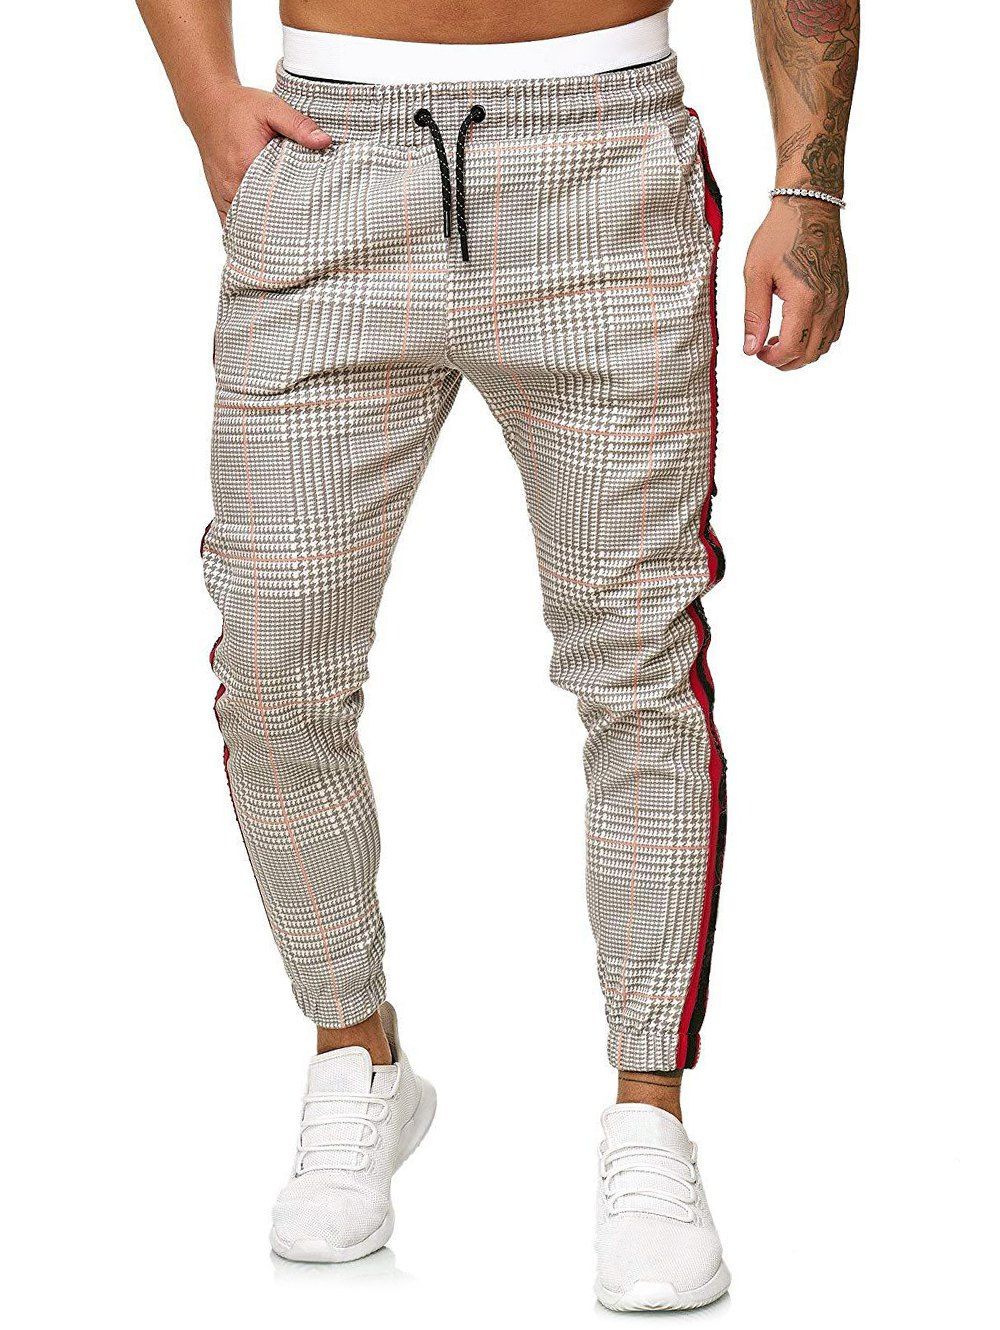 [36% OFF] 2021 Houndstooth Print Side Stripe Jogger Pants In Multicolor ...